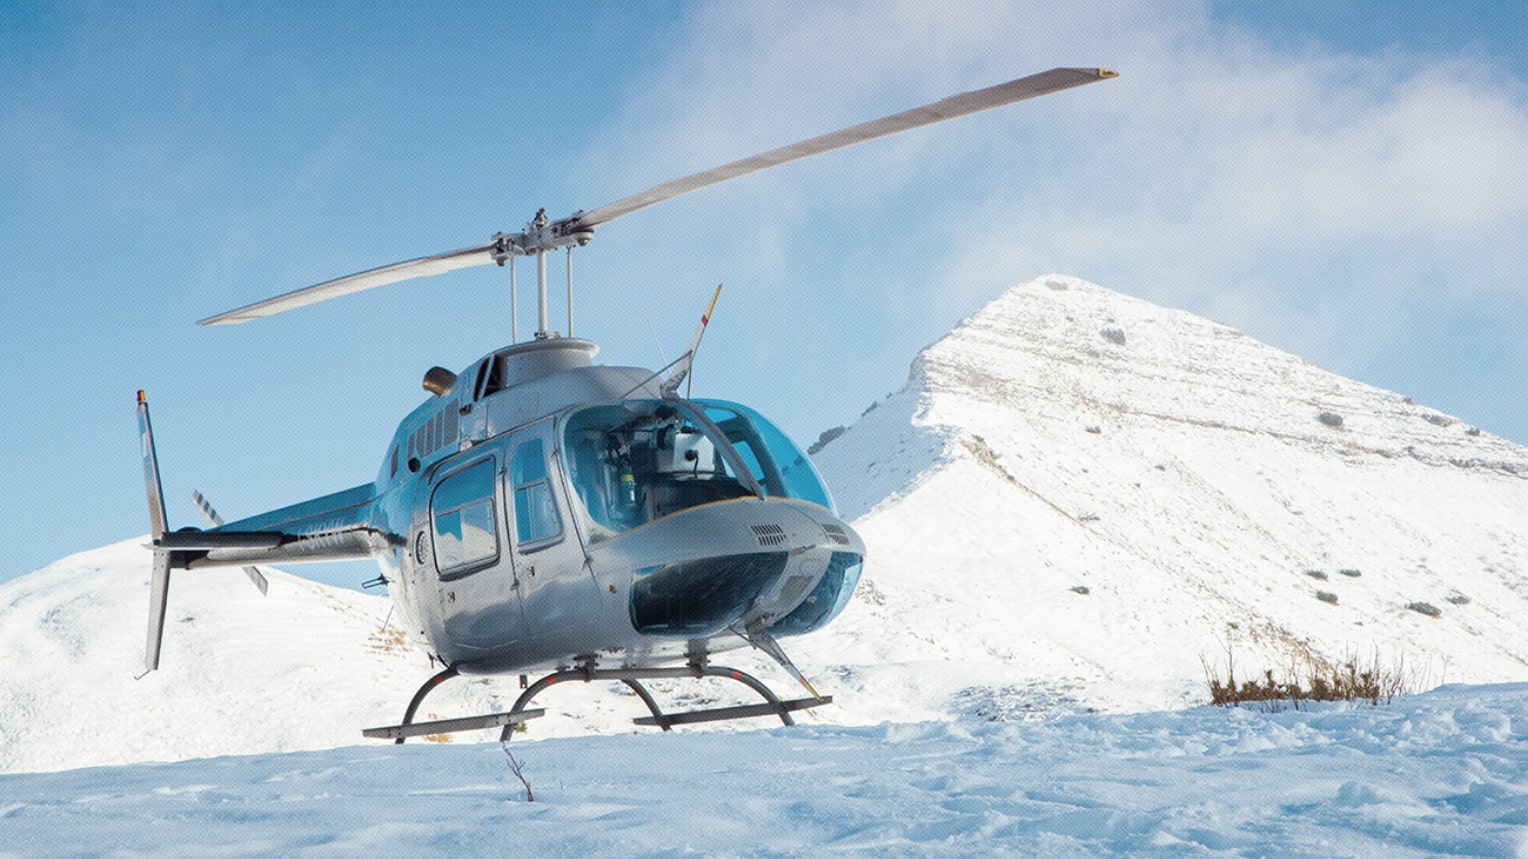 Helicopter over Snow